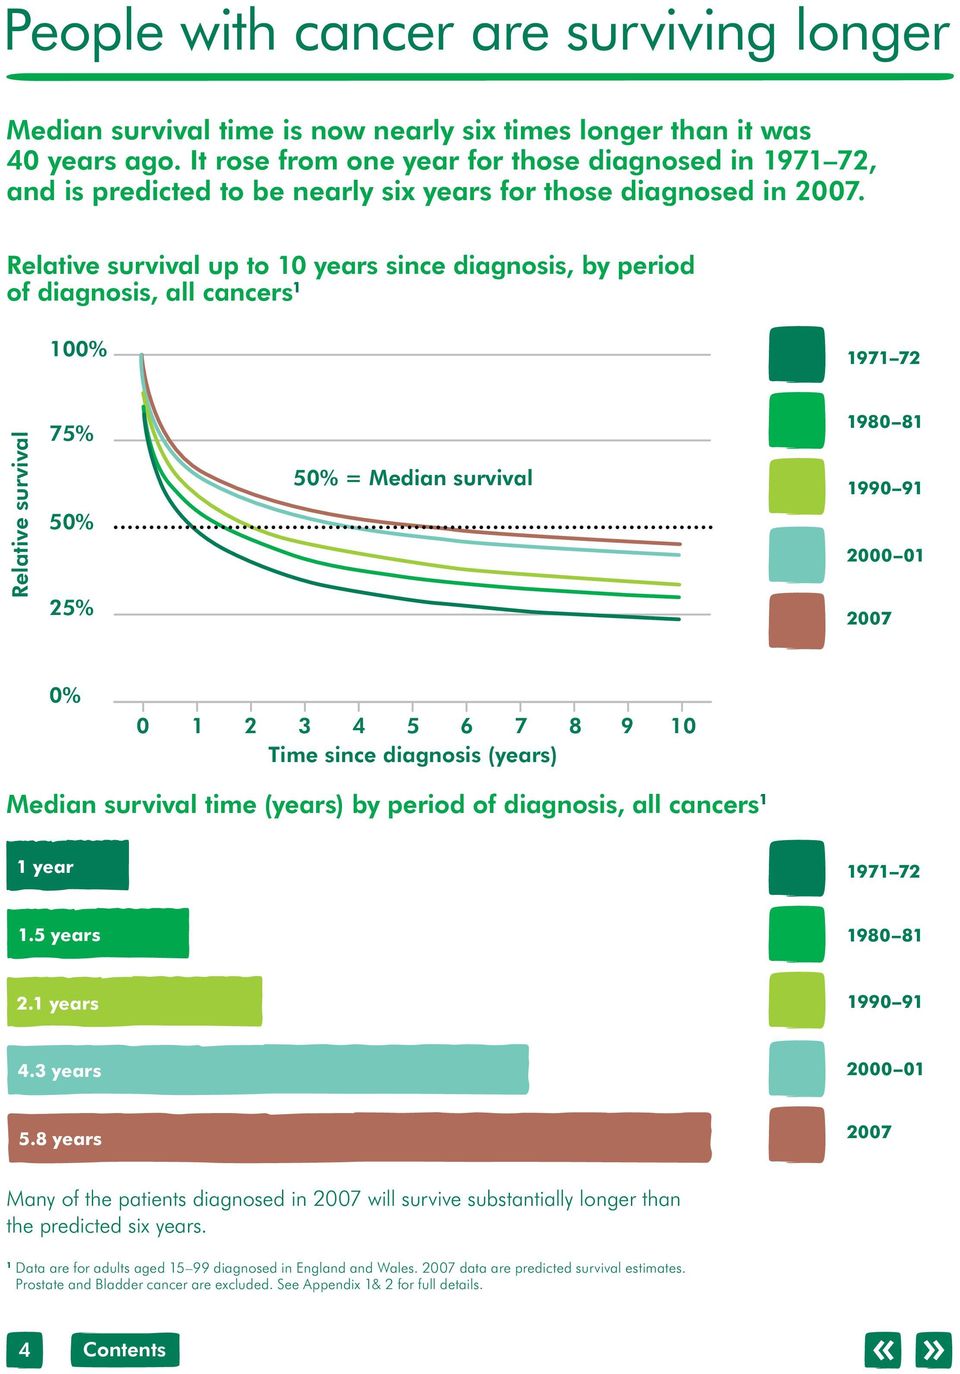 Relative survival up to 0 years since diagnosis, by period of diagnosis, all cancers 00% 97 72 Relative survival 75% 50% 25% 50% = Median survival 980 8 990 9 2000 0 2007 0% 0 2 3 4 5 6 7 8 9 0 Time